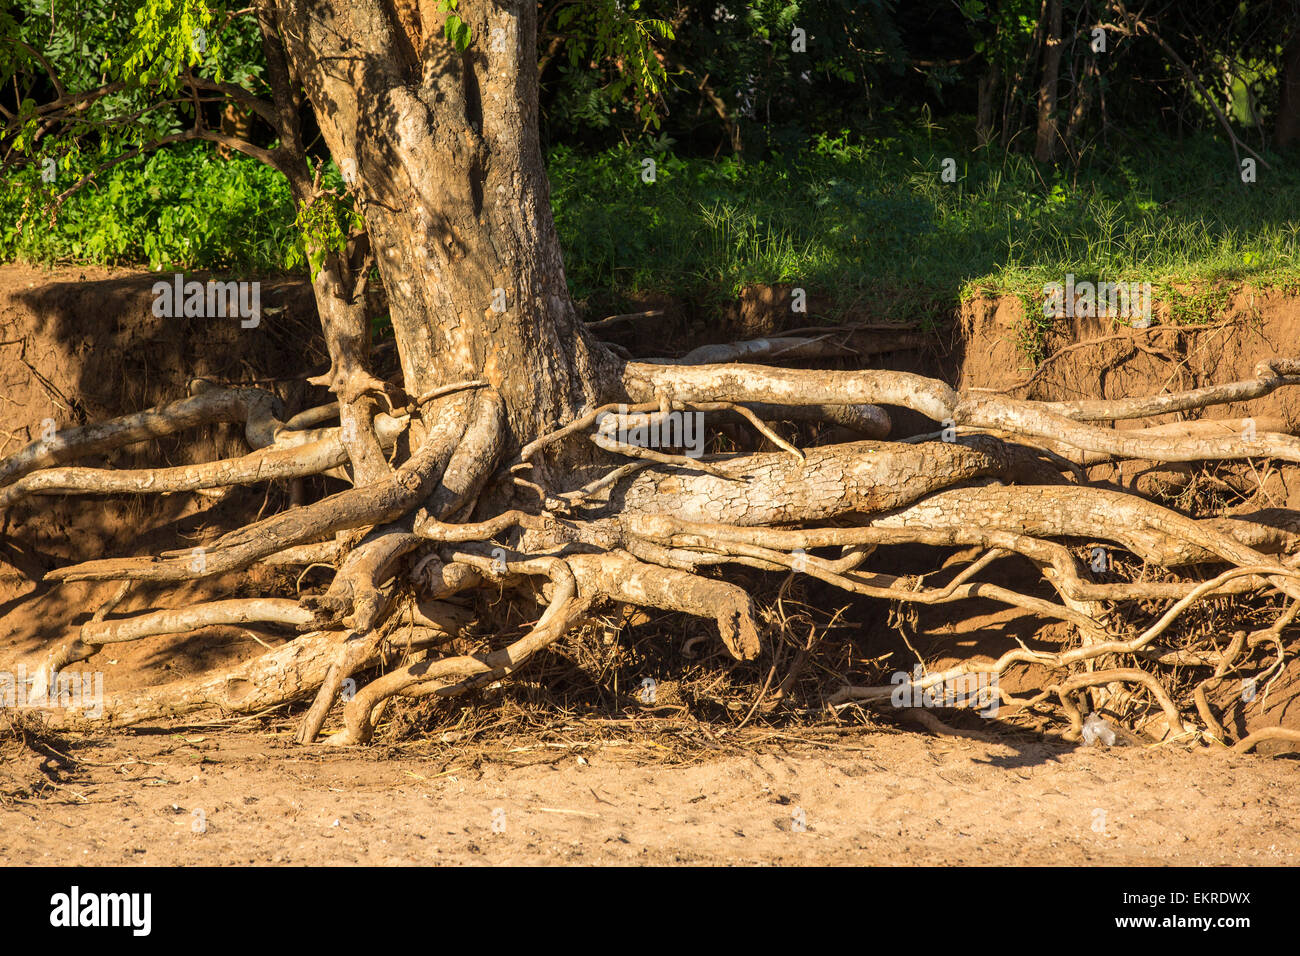 In mid January 2015, a three day period of excessive rain brought unprecedented floods to the small poor African country of Malawi. It displaced nearly quarter of a million people, devastated 64,000 hectares of land, and killed several hundred people. This shot shows a tree that has been undermined when the farmland soil was washed away around it, near Bangula, Malawi. Stock Photo